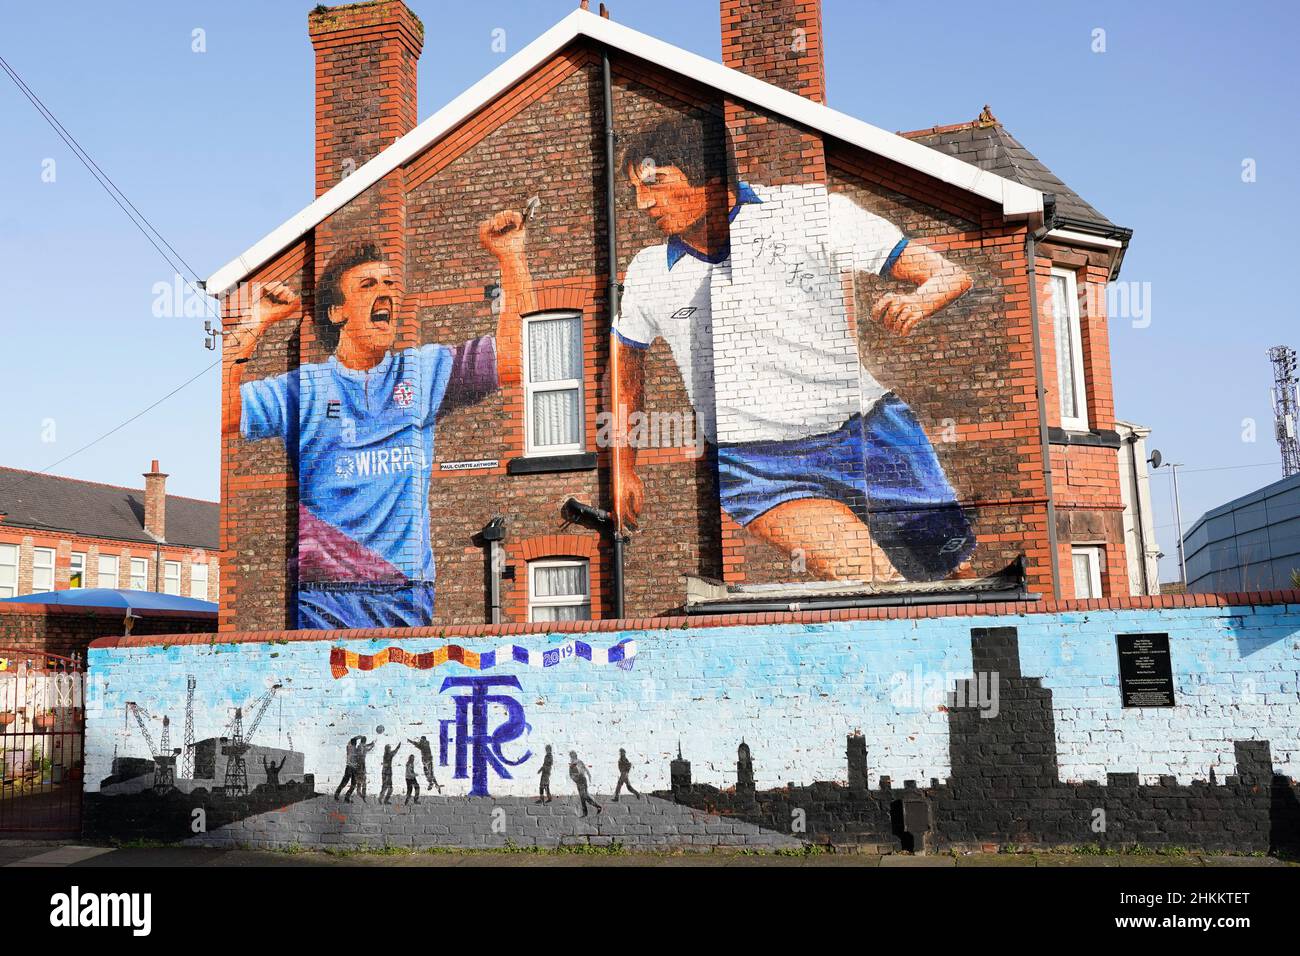 General view of a mural outside Prenton Park Stadium before the gamePicture by Steve Flynn/AHPIX.com, Football: The SkyBet League 2 match Tranmere Rov Stock Photo